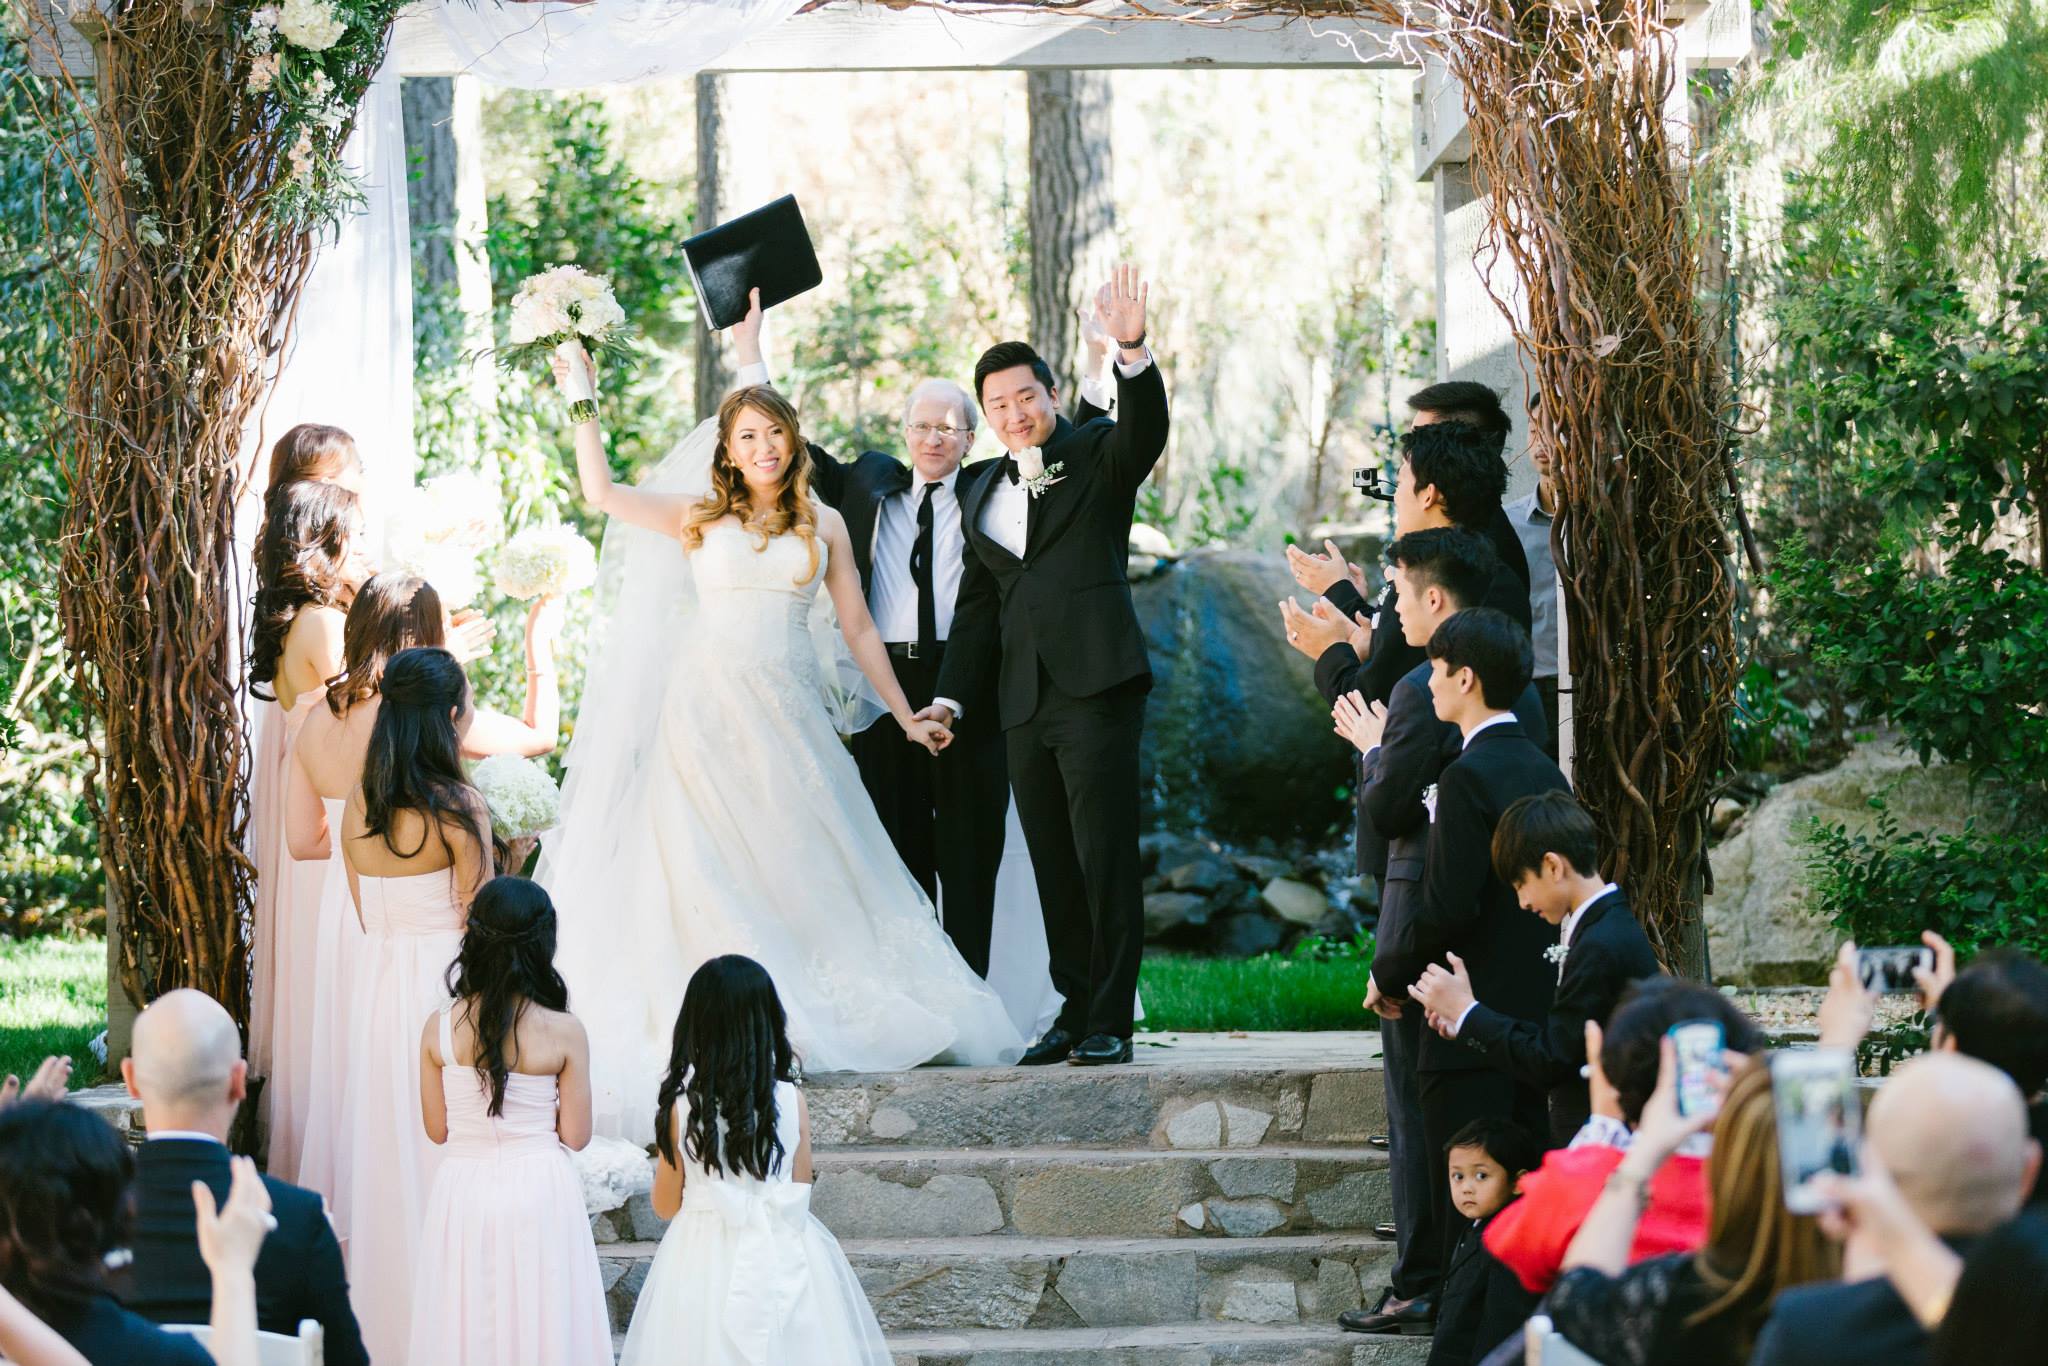 Rustic and elegant wedding at Calamigos Ranch in the Redwood room, ceremony